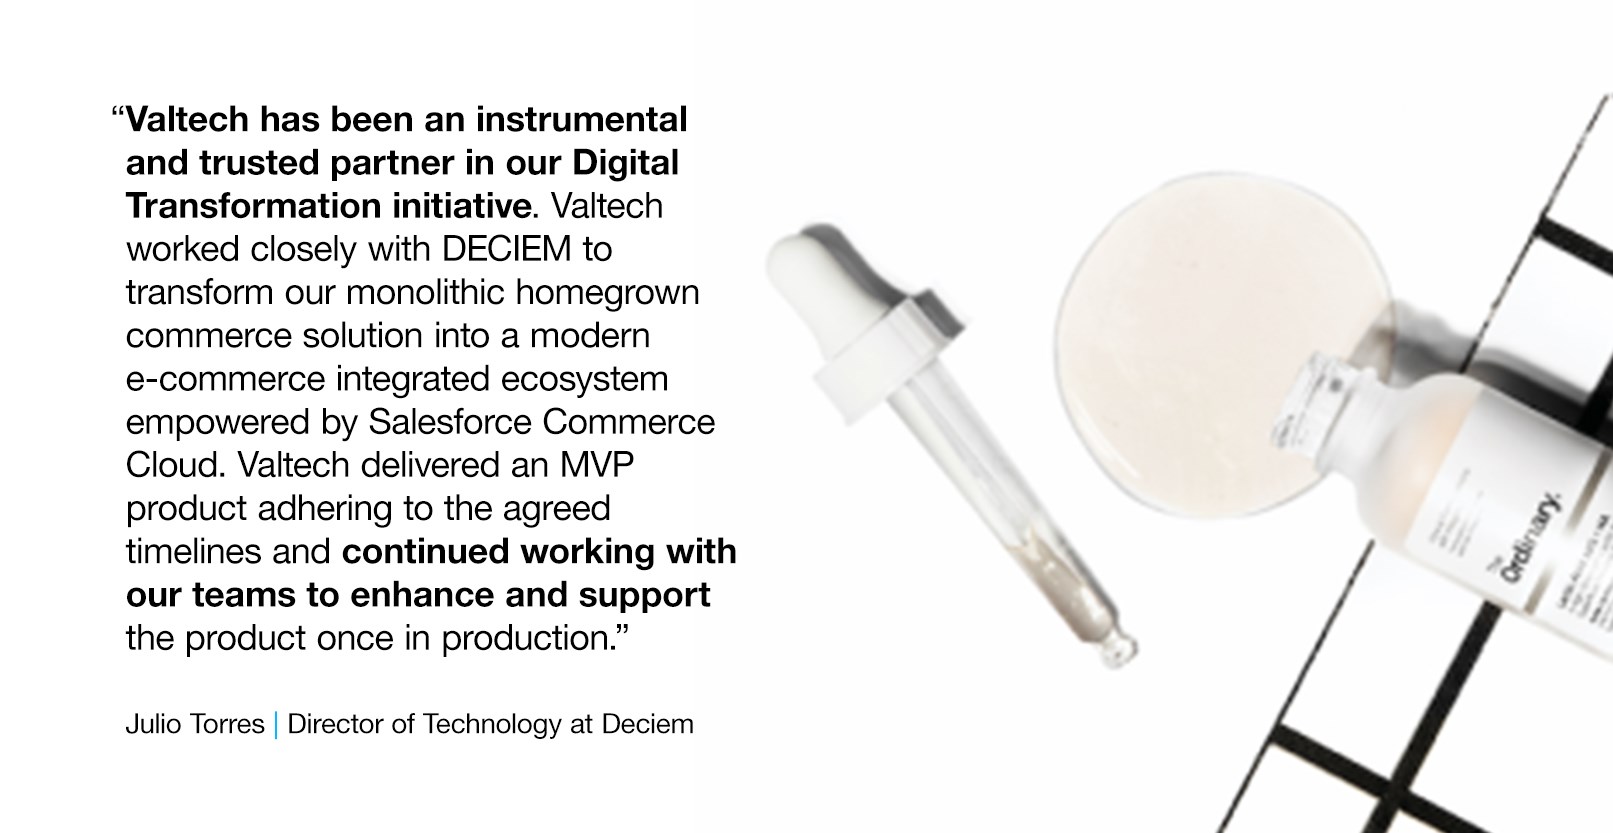 Deciem Quote and Deciem serum image which reads: “Valtech has been an instrumental and trusted partner in our Digital Transformation initiative. Valtech worked closely with DECIEM to transform our monolithic homegrown commerce solution into a modern e-commerce integrated ecosystem empowered by Salesforce Commerce Cloud. Valtech delivered an MVP product adhering to the agreed timelines and continued working with our teams to enhance and support the product once in production.” -- Julio Torres, Director of Technology